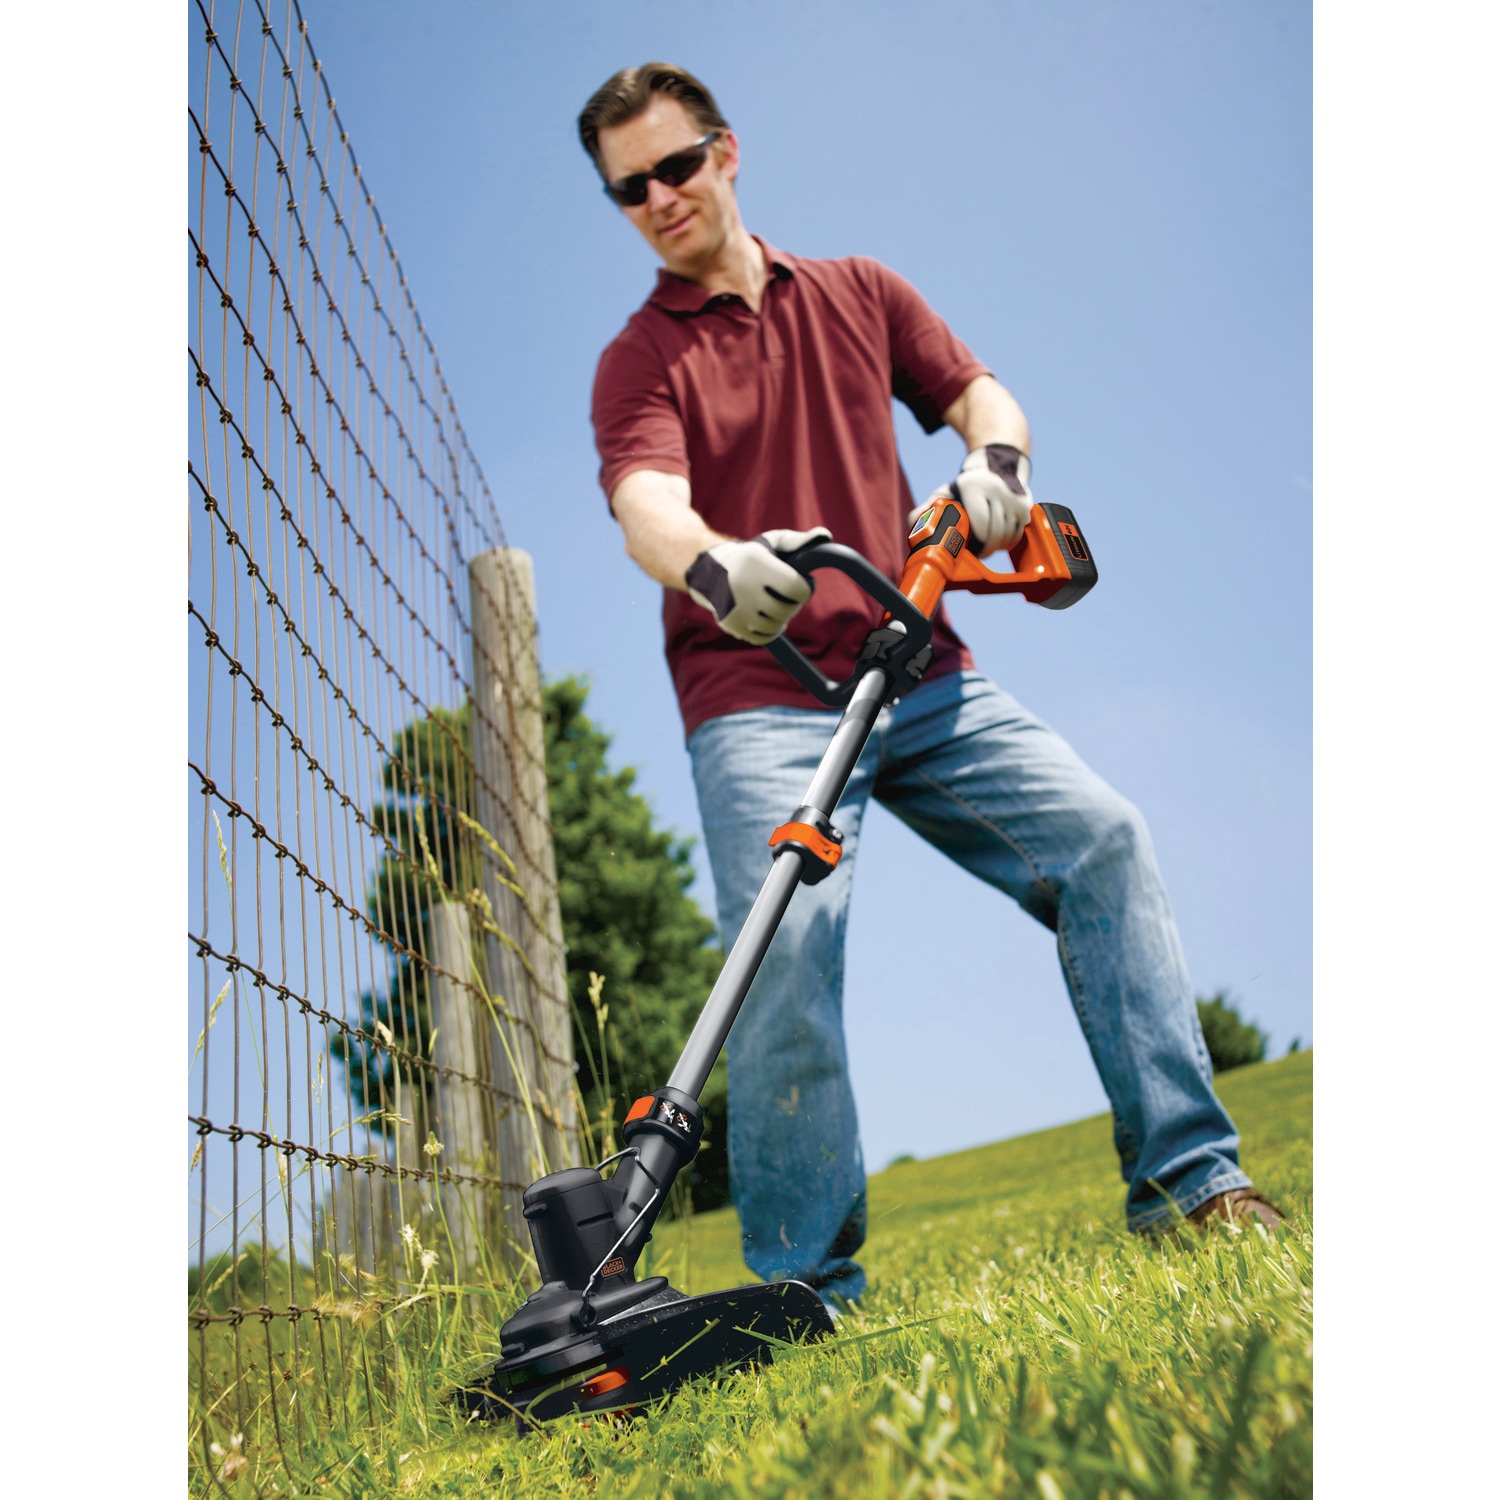 Black and Decker 40V MAX Cordless String Trimmer & Sweeper Combo